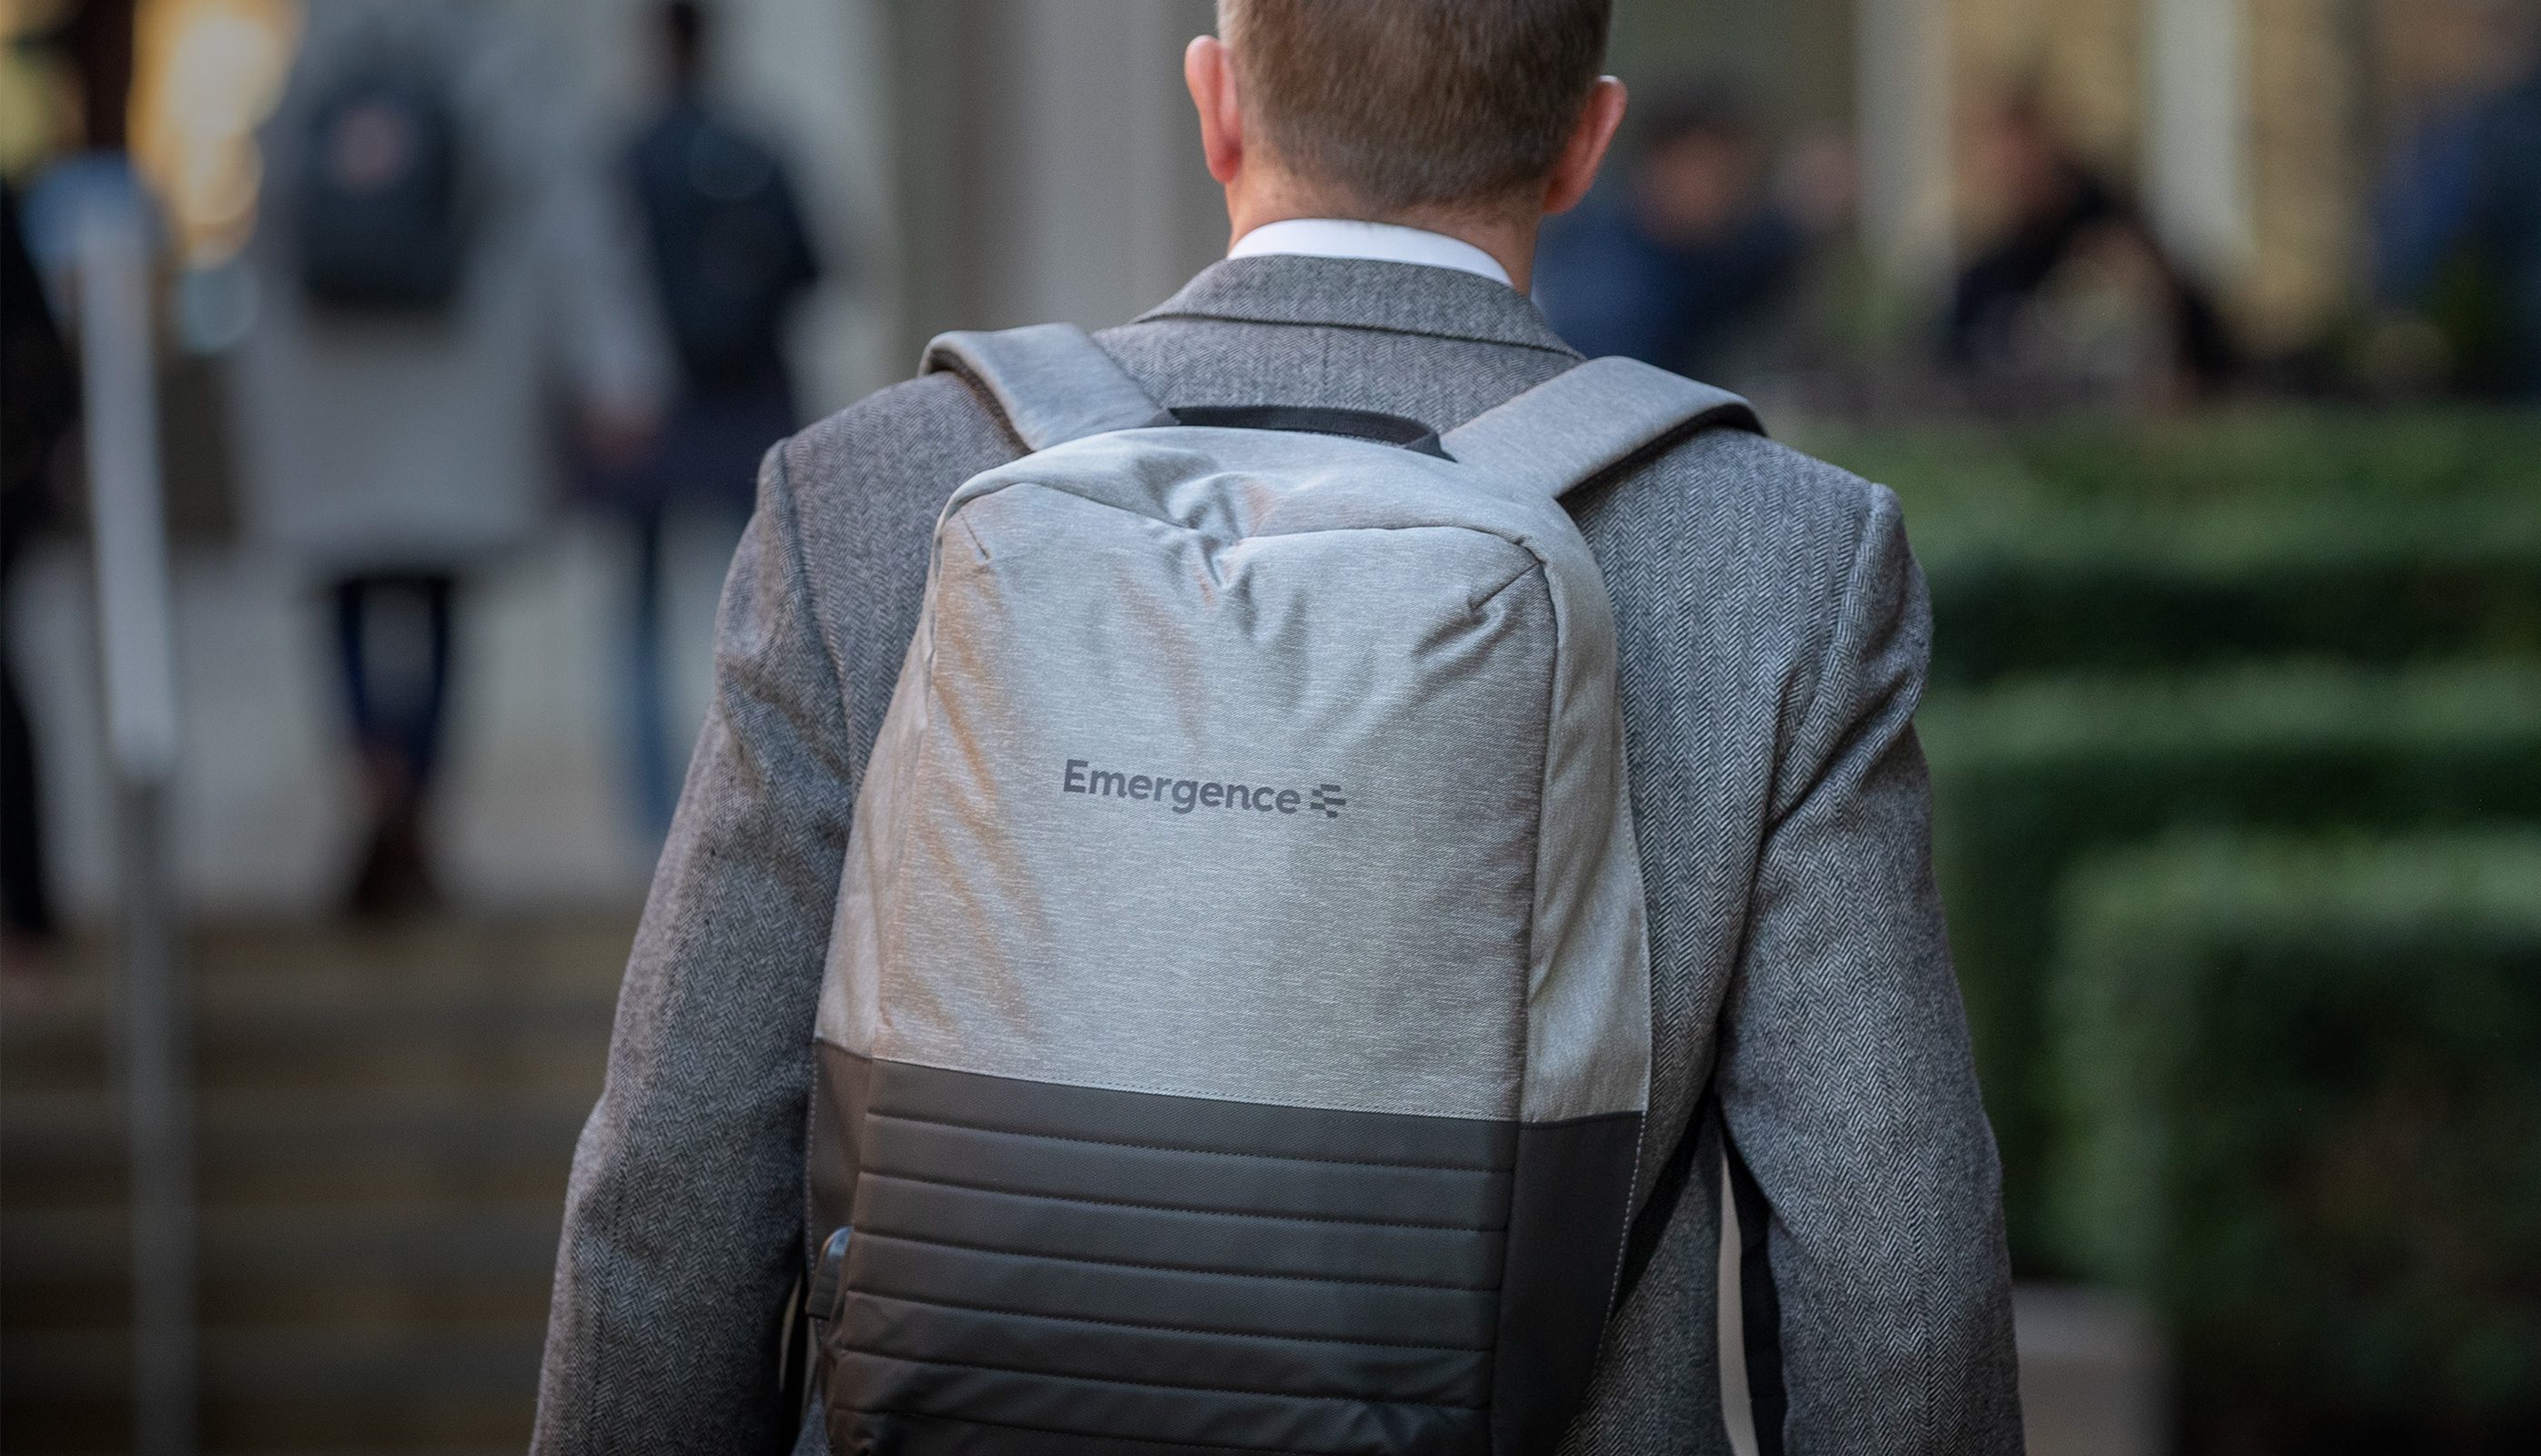 Image of back of suited business man with branded backpack